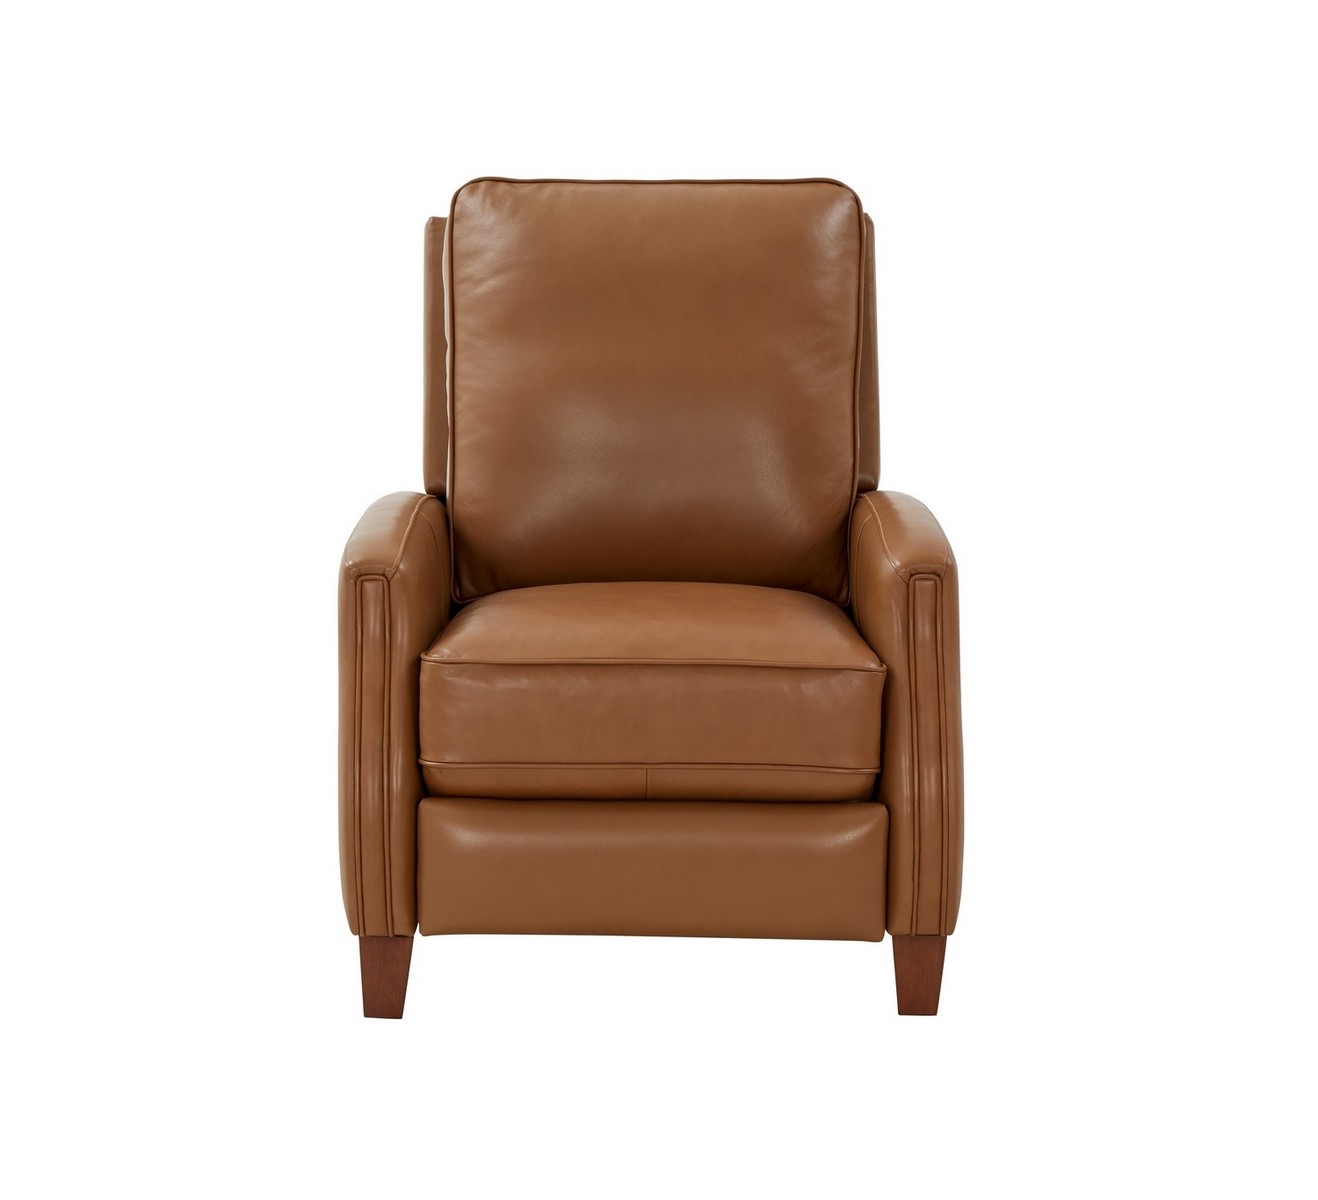 Barcalounger Penrose Recliner Chair - Shoreham Ponytail/All Leather